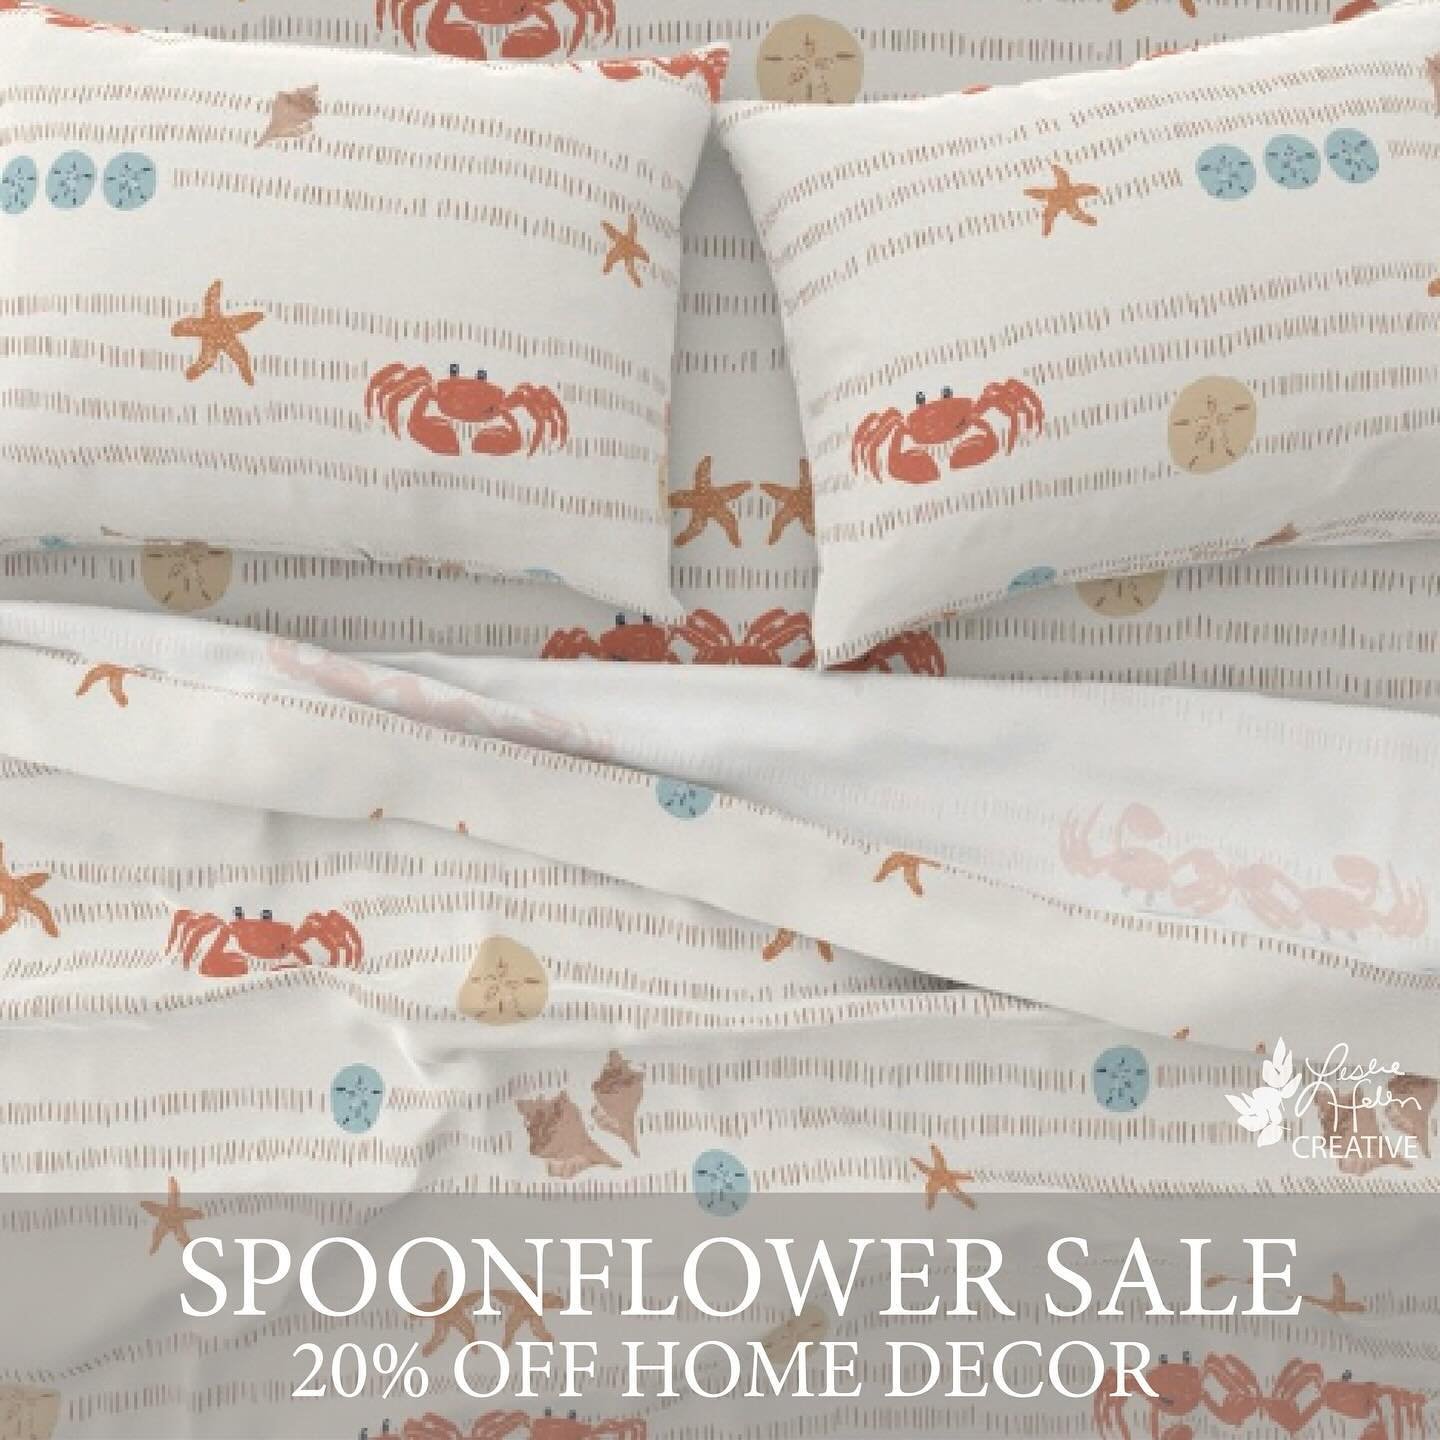 ✨In need of some unique decor? bedding? pillows?Spoonflower has 20% off home decor through the end of tonight (4/18/24). ✨.
.
.
#spoonflowerhome #spoonflowermakers #spoonflowerdesigner #spoonflower #crustacean #crustaceancore #beachdesign #beachinter